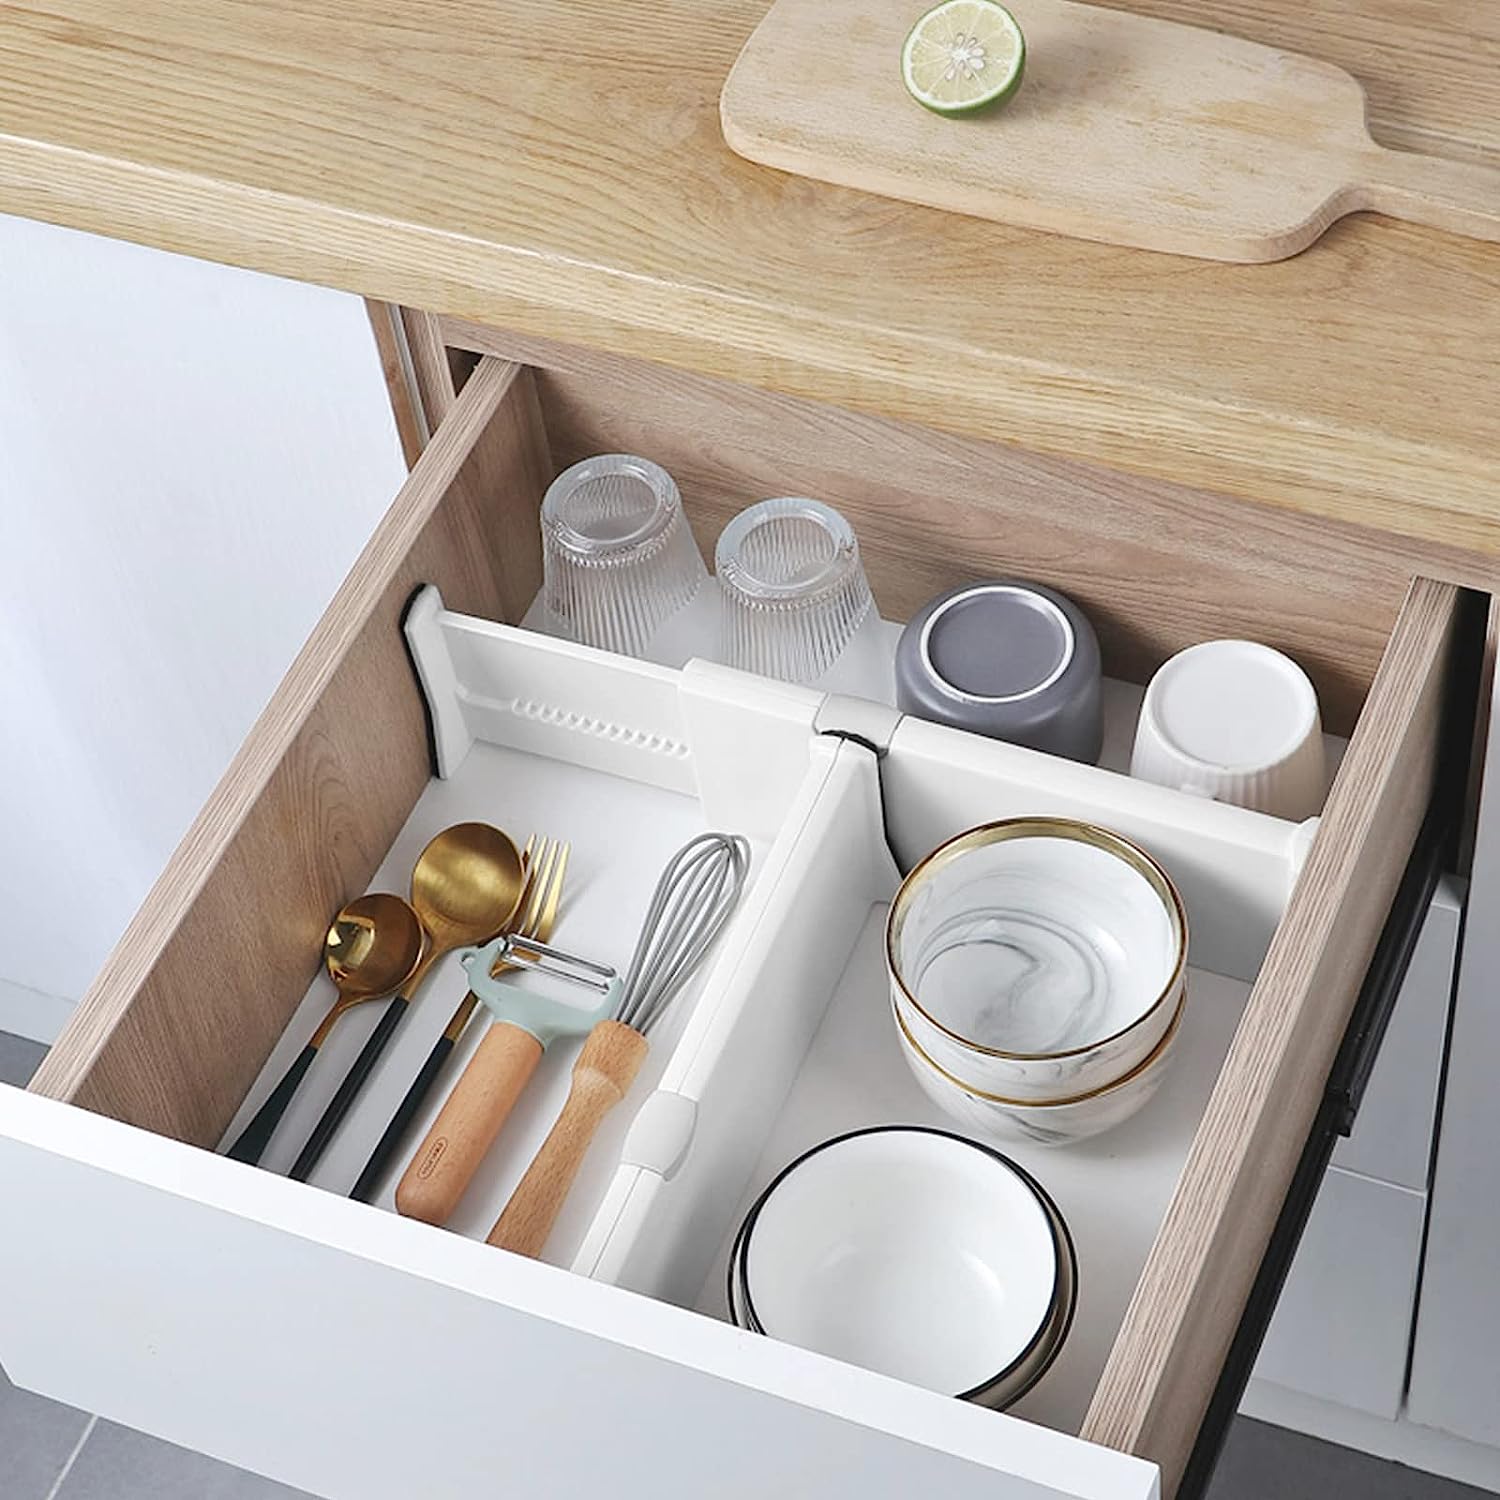 A drawer full of dishes and glasses separated with the help of drawer separator